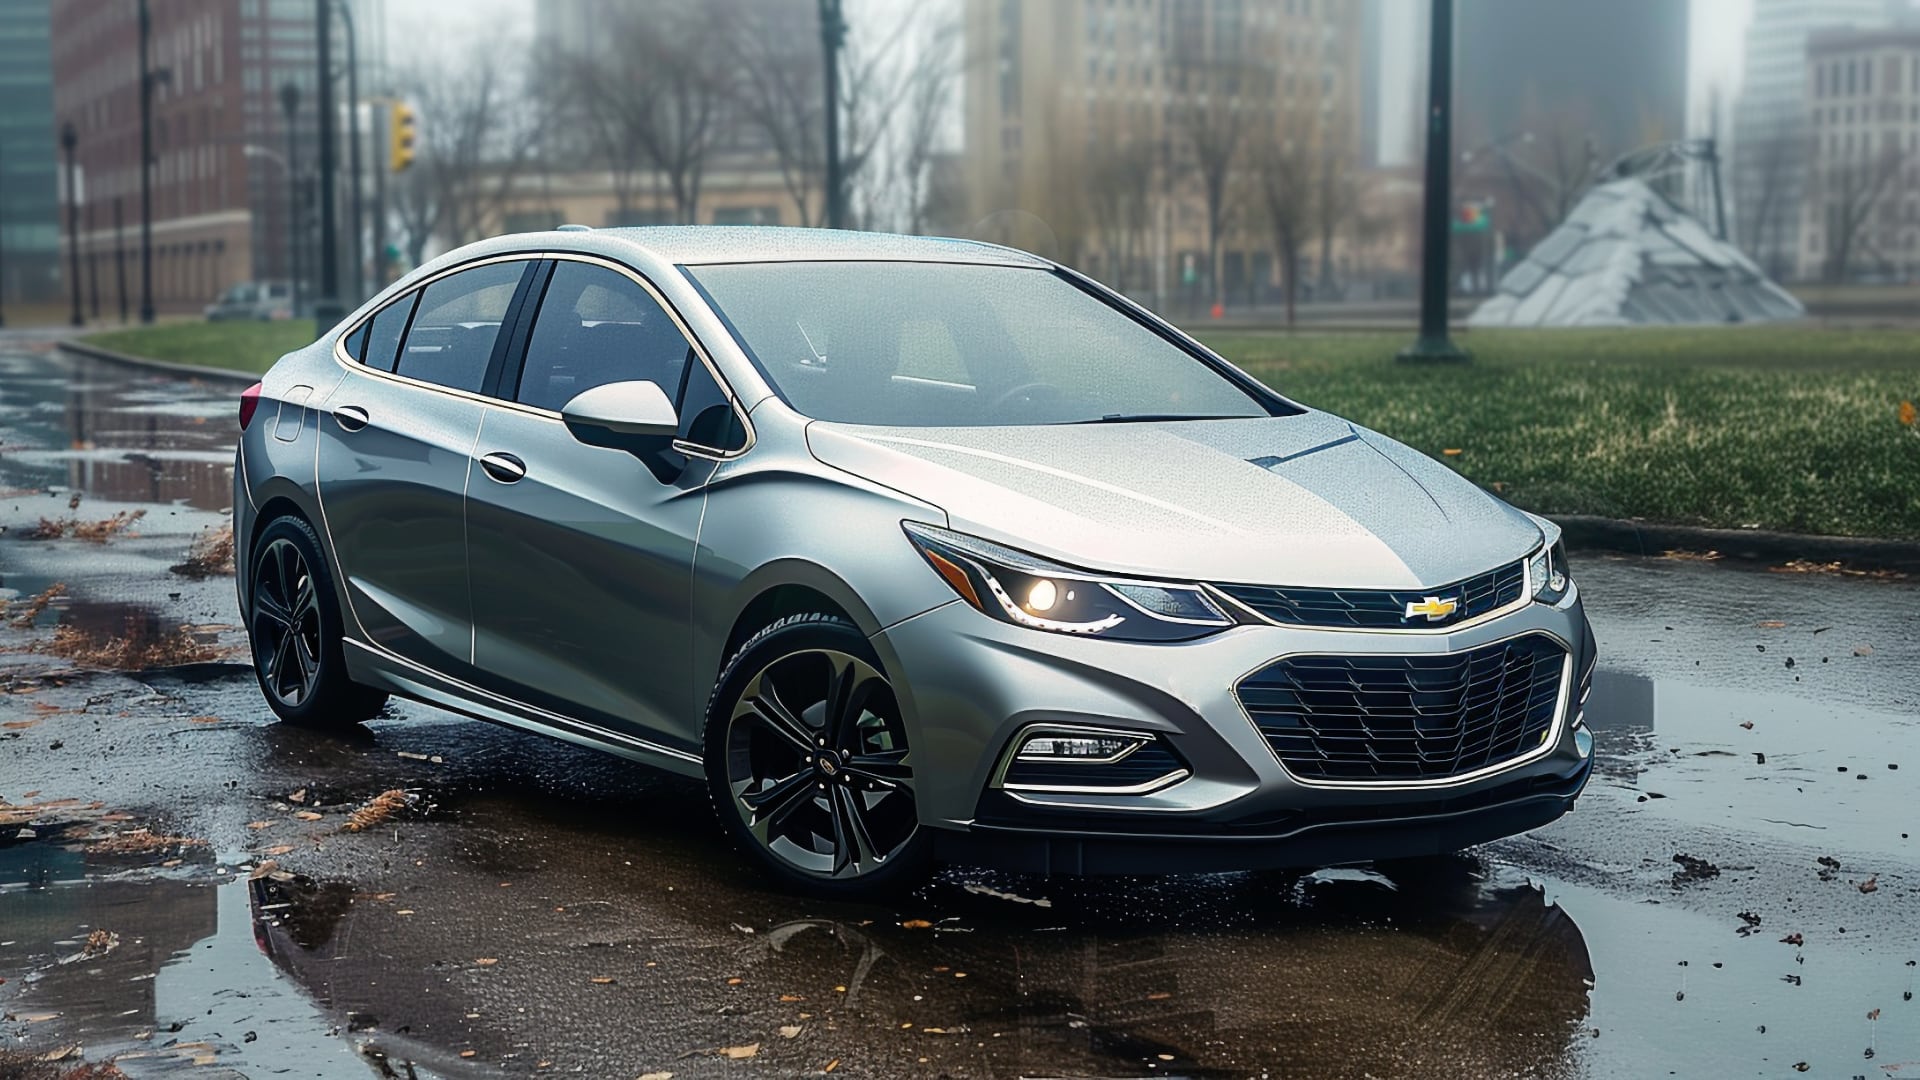 The 2019 Chevrolet Cruze, a Chevy Cruze year to avoid, is parked on a city street.